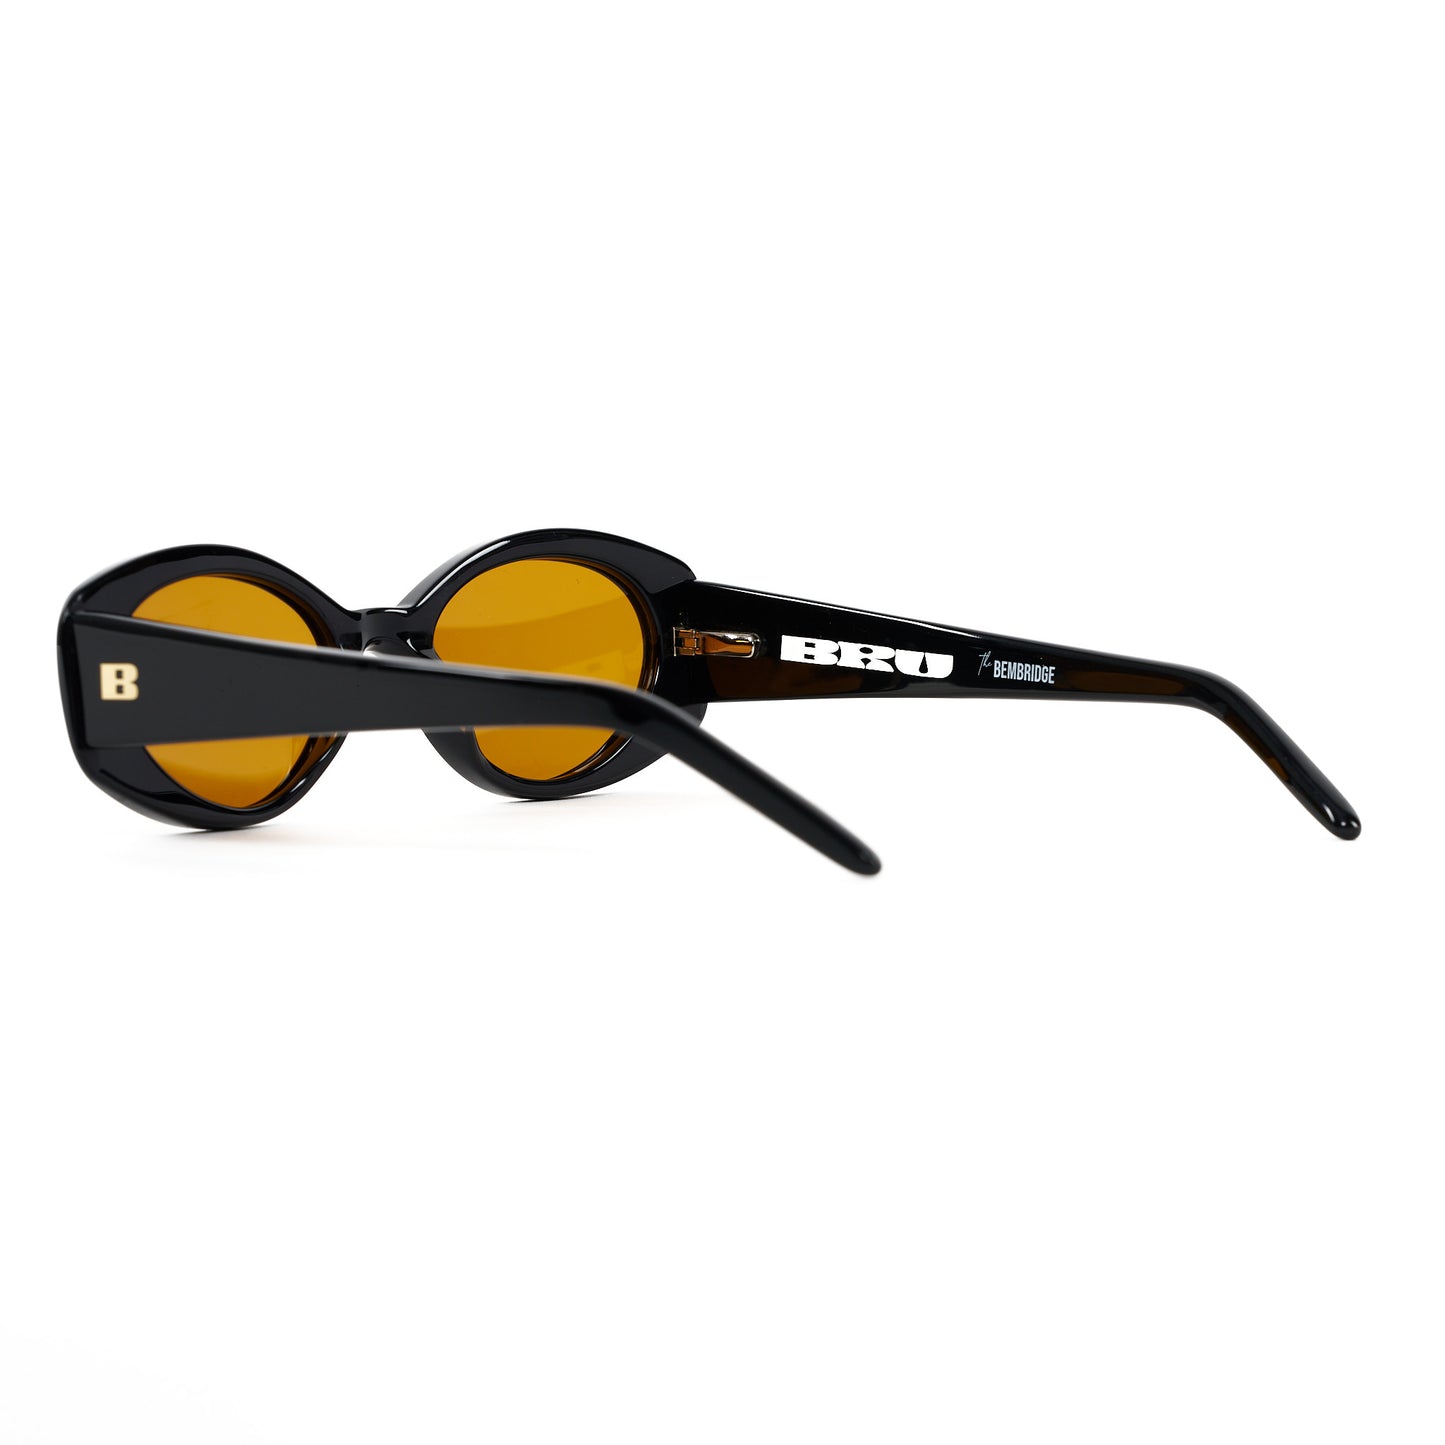  Thick framed oval sunglasses with an orange lens. Acetate Frames and Polarized lenses.